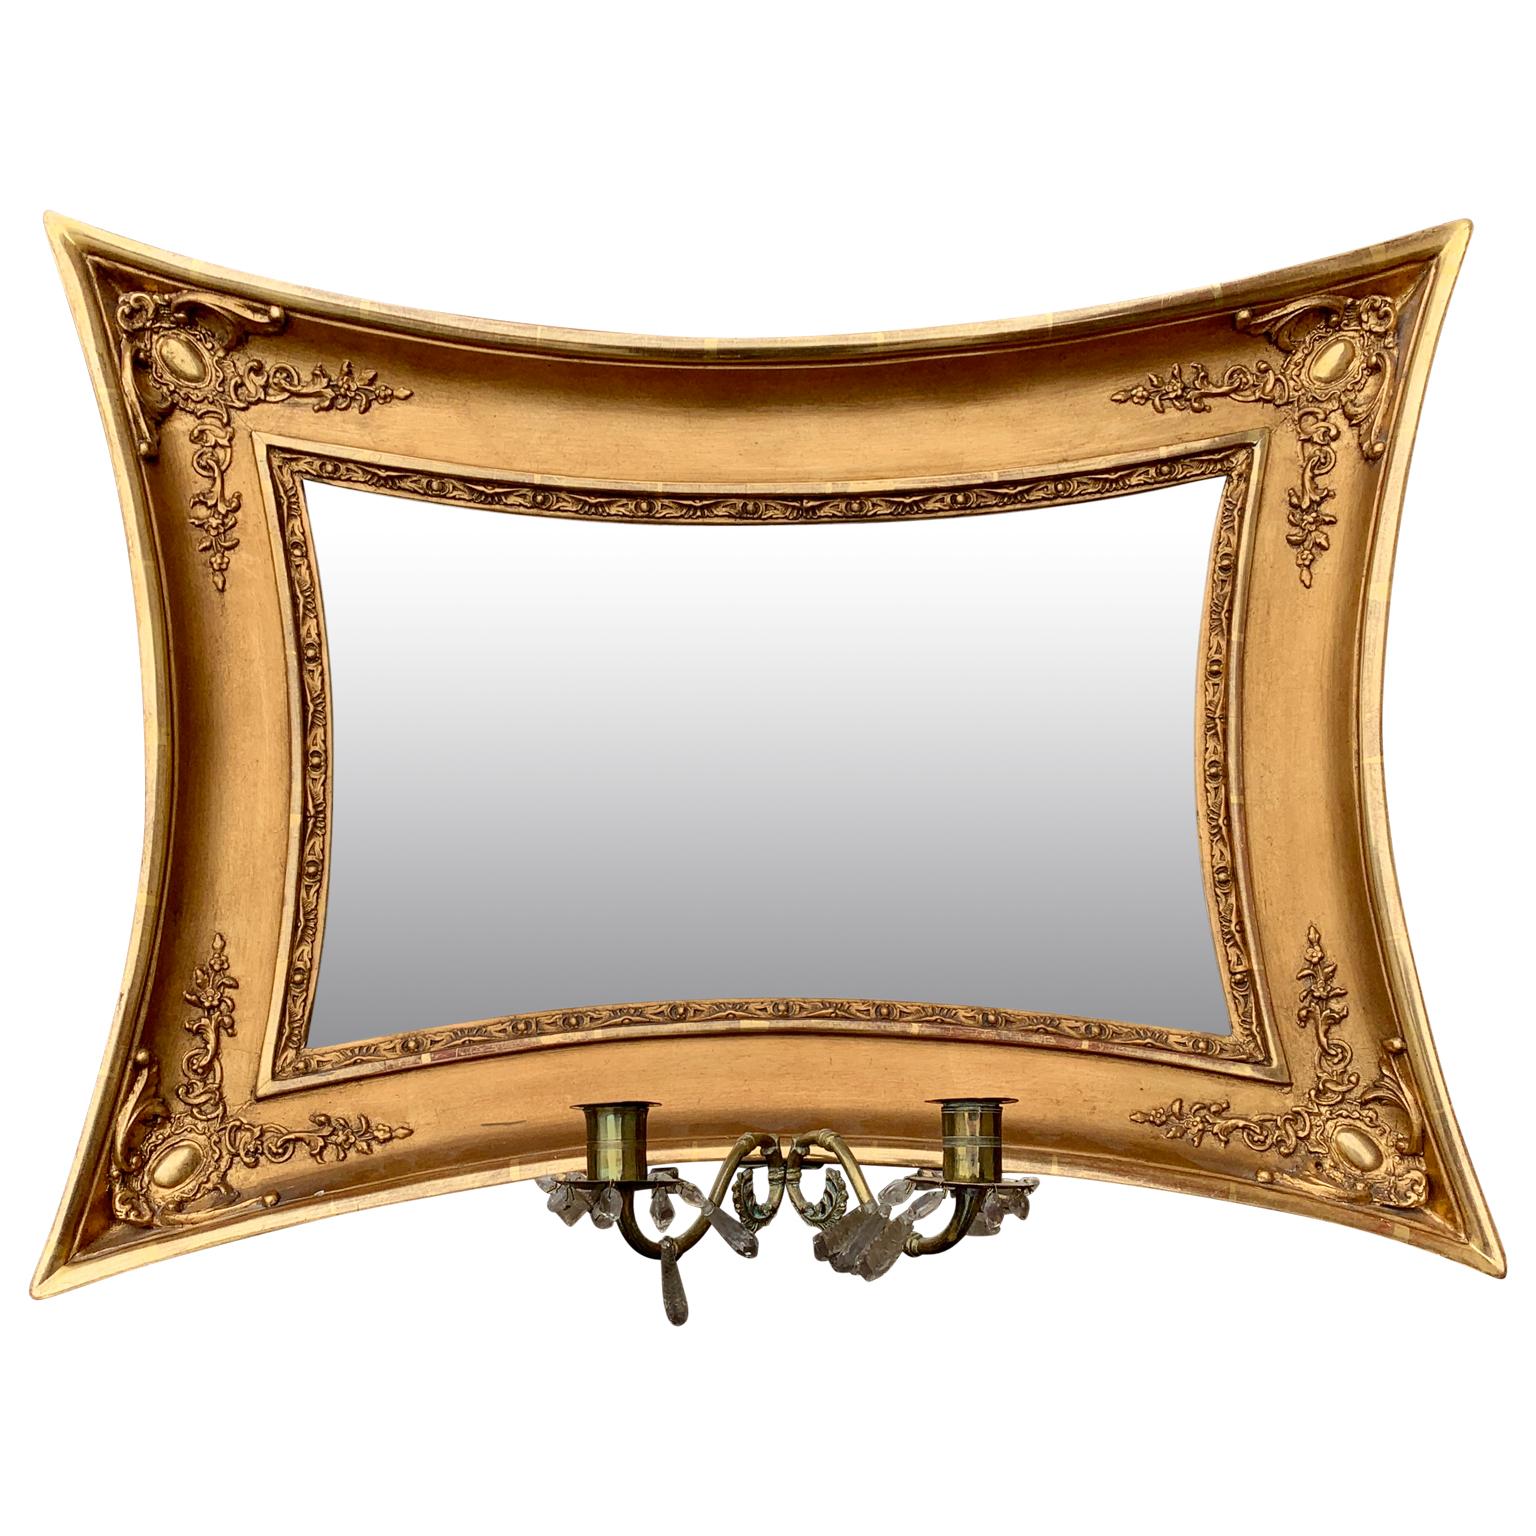 Scandinavian Empire Giltwood Concave Sided Sconce Mirror In Good Condition For Sale In Haddonfield, NJ